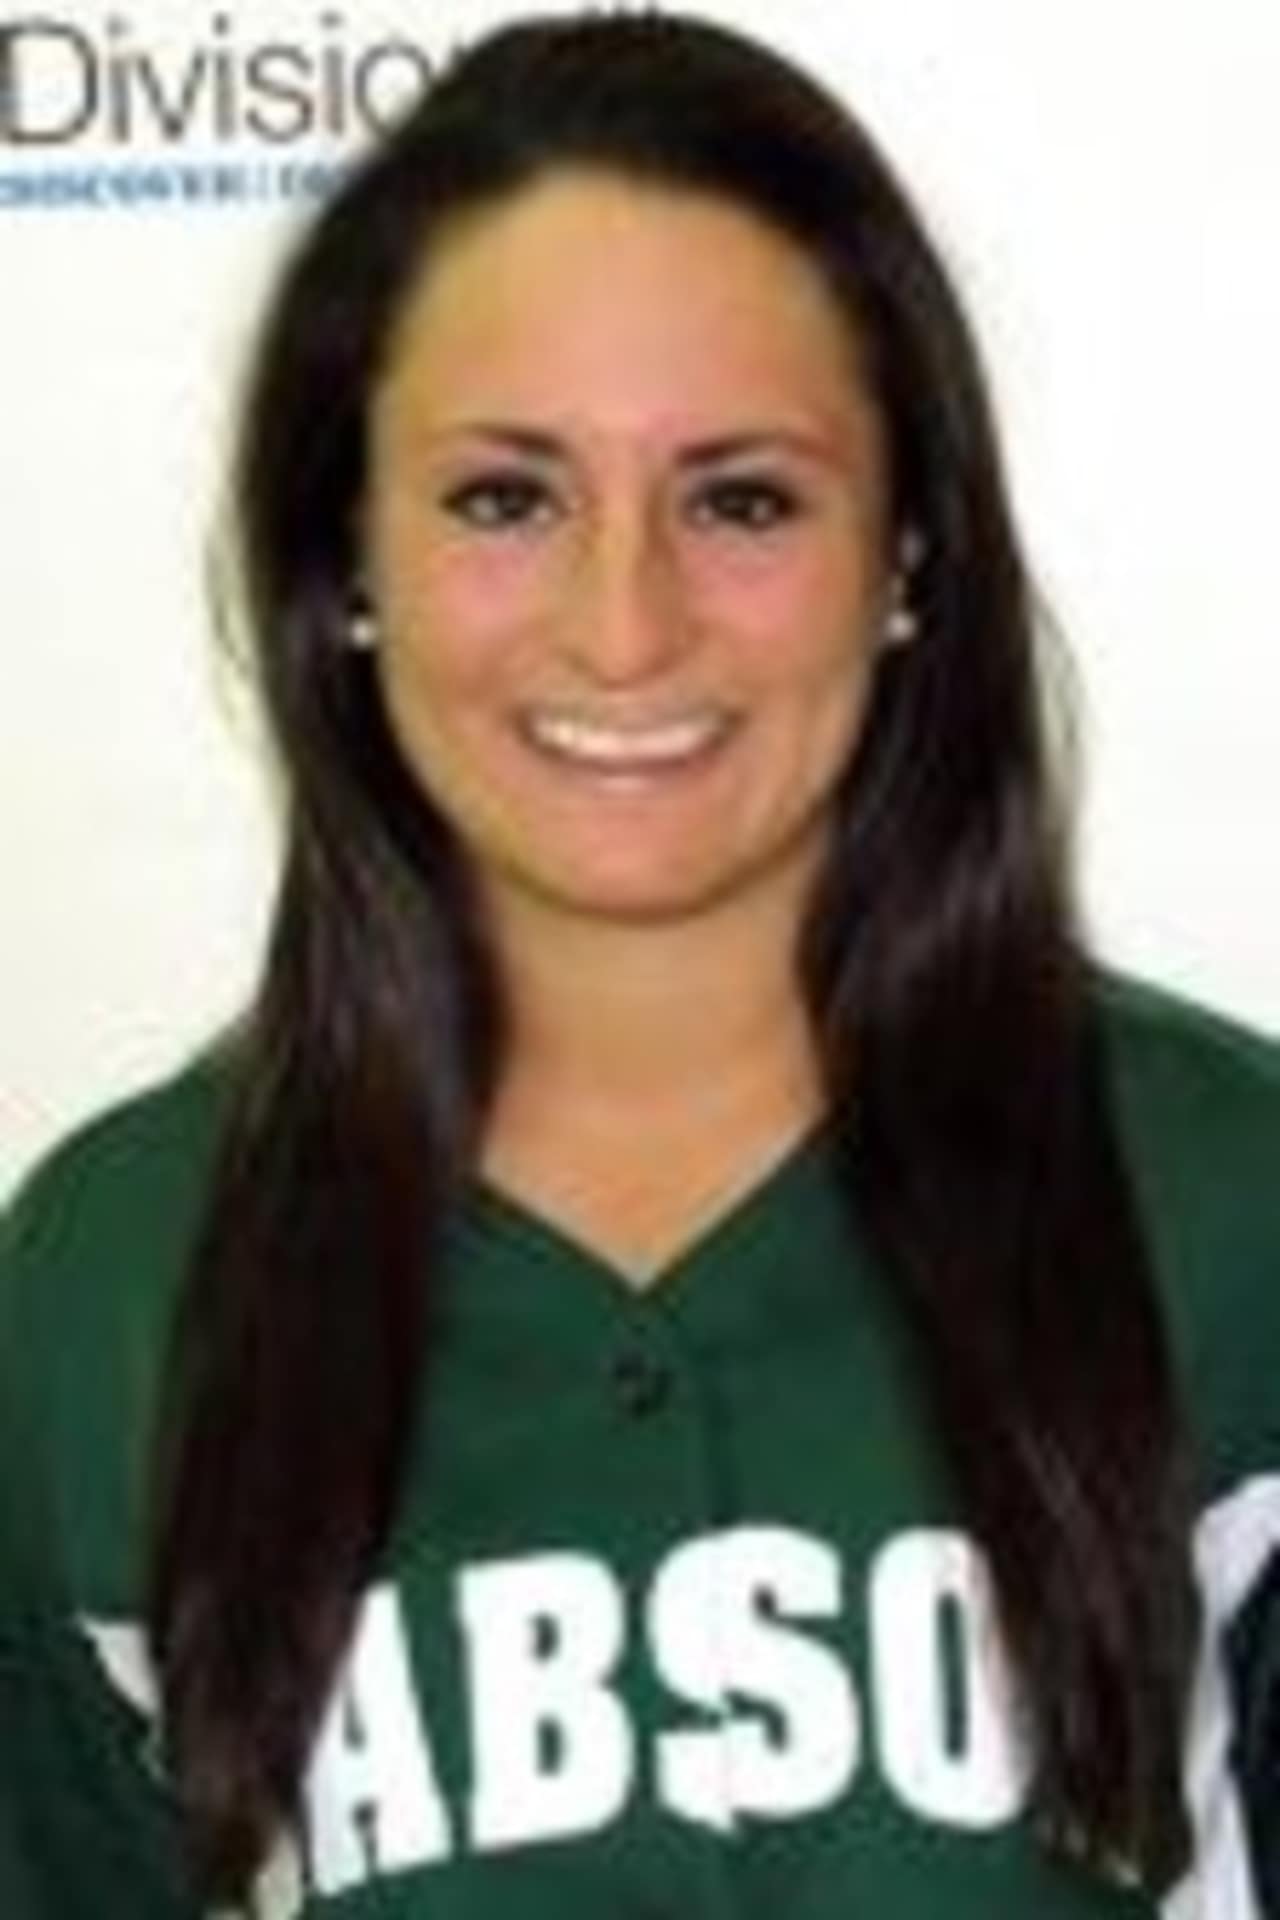 Lindsey Schmid and the Babson College softball team play Thursday in the first round of the Division III NCAA Tournament.